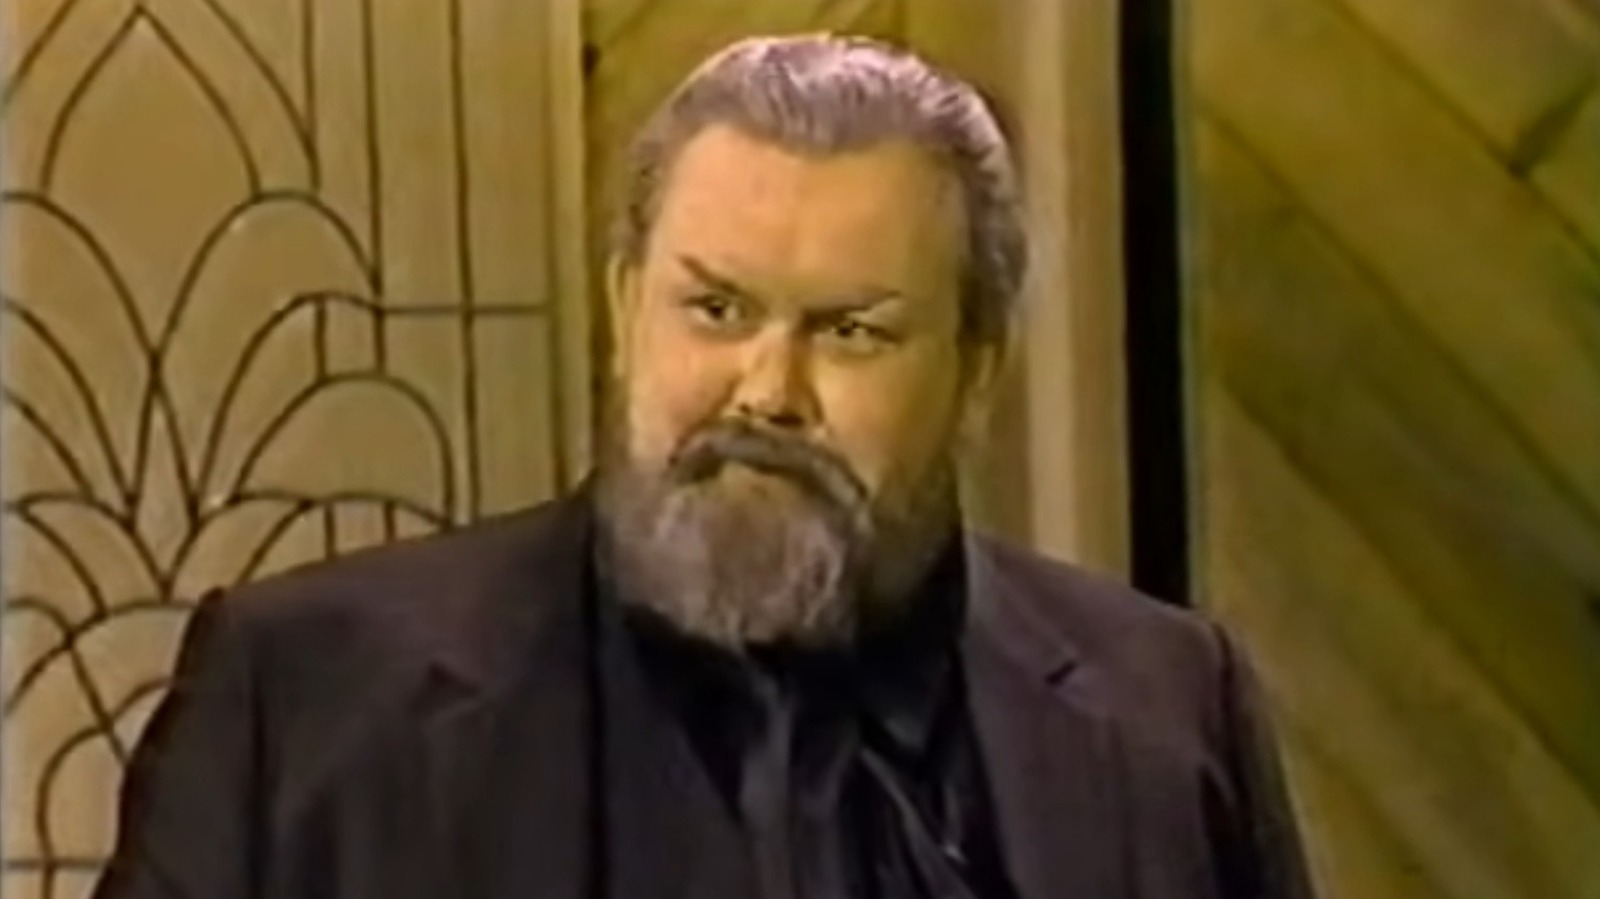 John Candy Brilliantly Channeled Orson Welles For Billy Crystal's Short-Lived TV Show